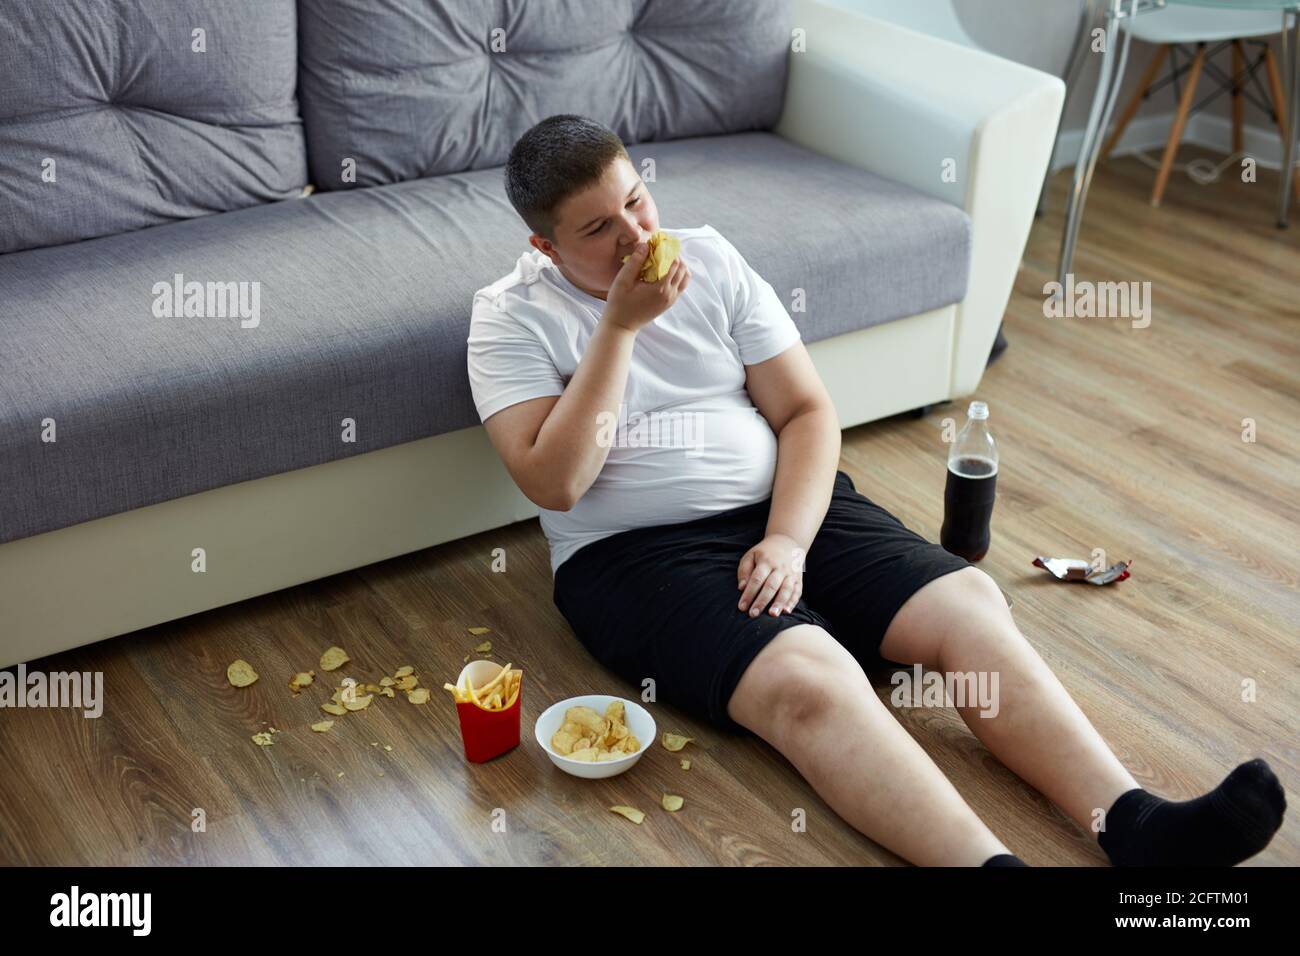 fat overweight teenager boy has bad nutrition, eat unhealthy food. sit on the floor eating junk food and watching tv Stock Photo